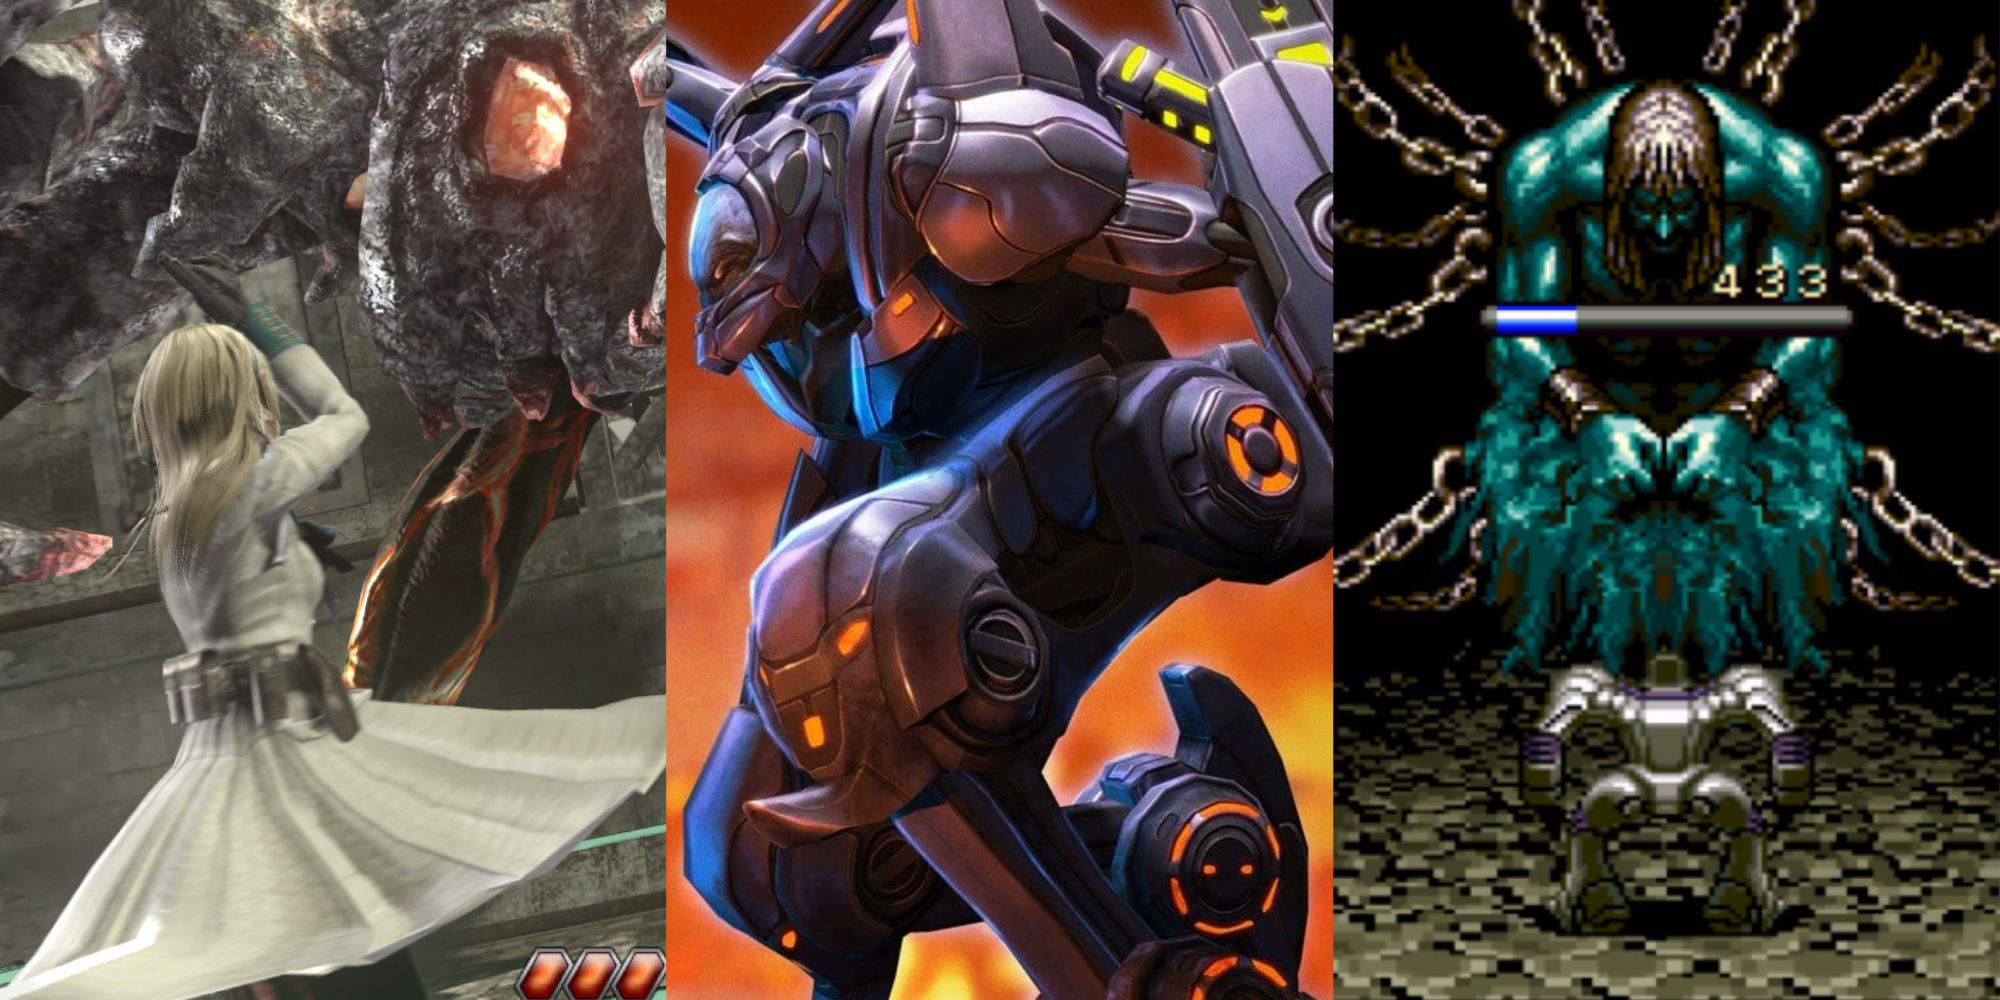 Characters from Resonance of Fate, XCOM, and 7th Saga facing their respective enemies